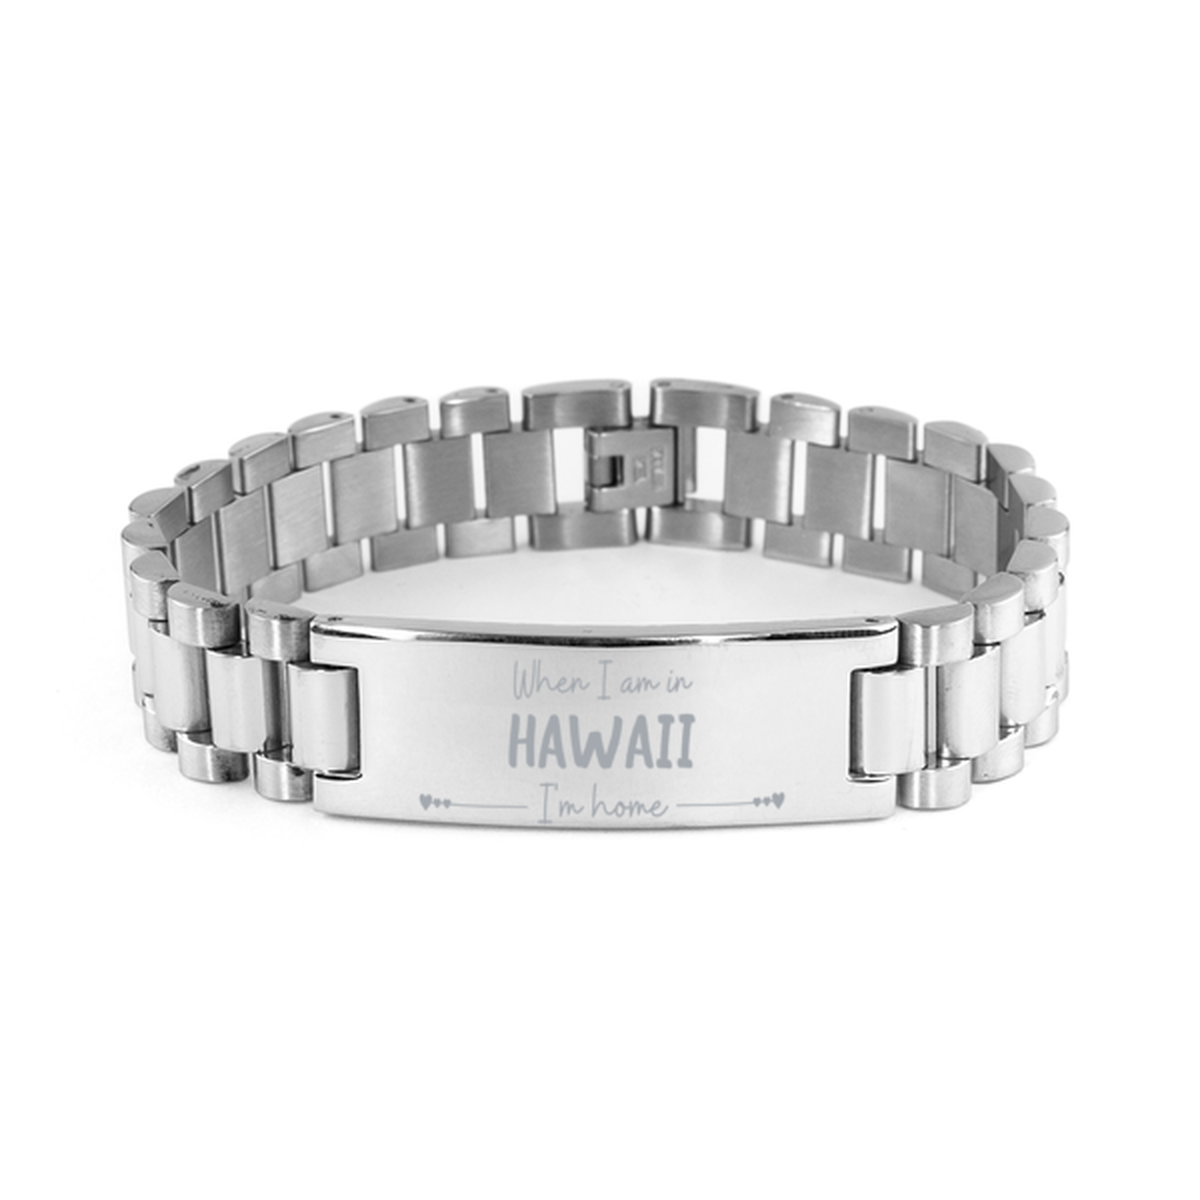 When I am in Hawaii I'm home Ladder Stainless Steel Bracelet, Cheap Gifts For Hawaii, State Hawaii Birthday Gifts for Friends Coworker